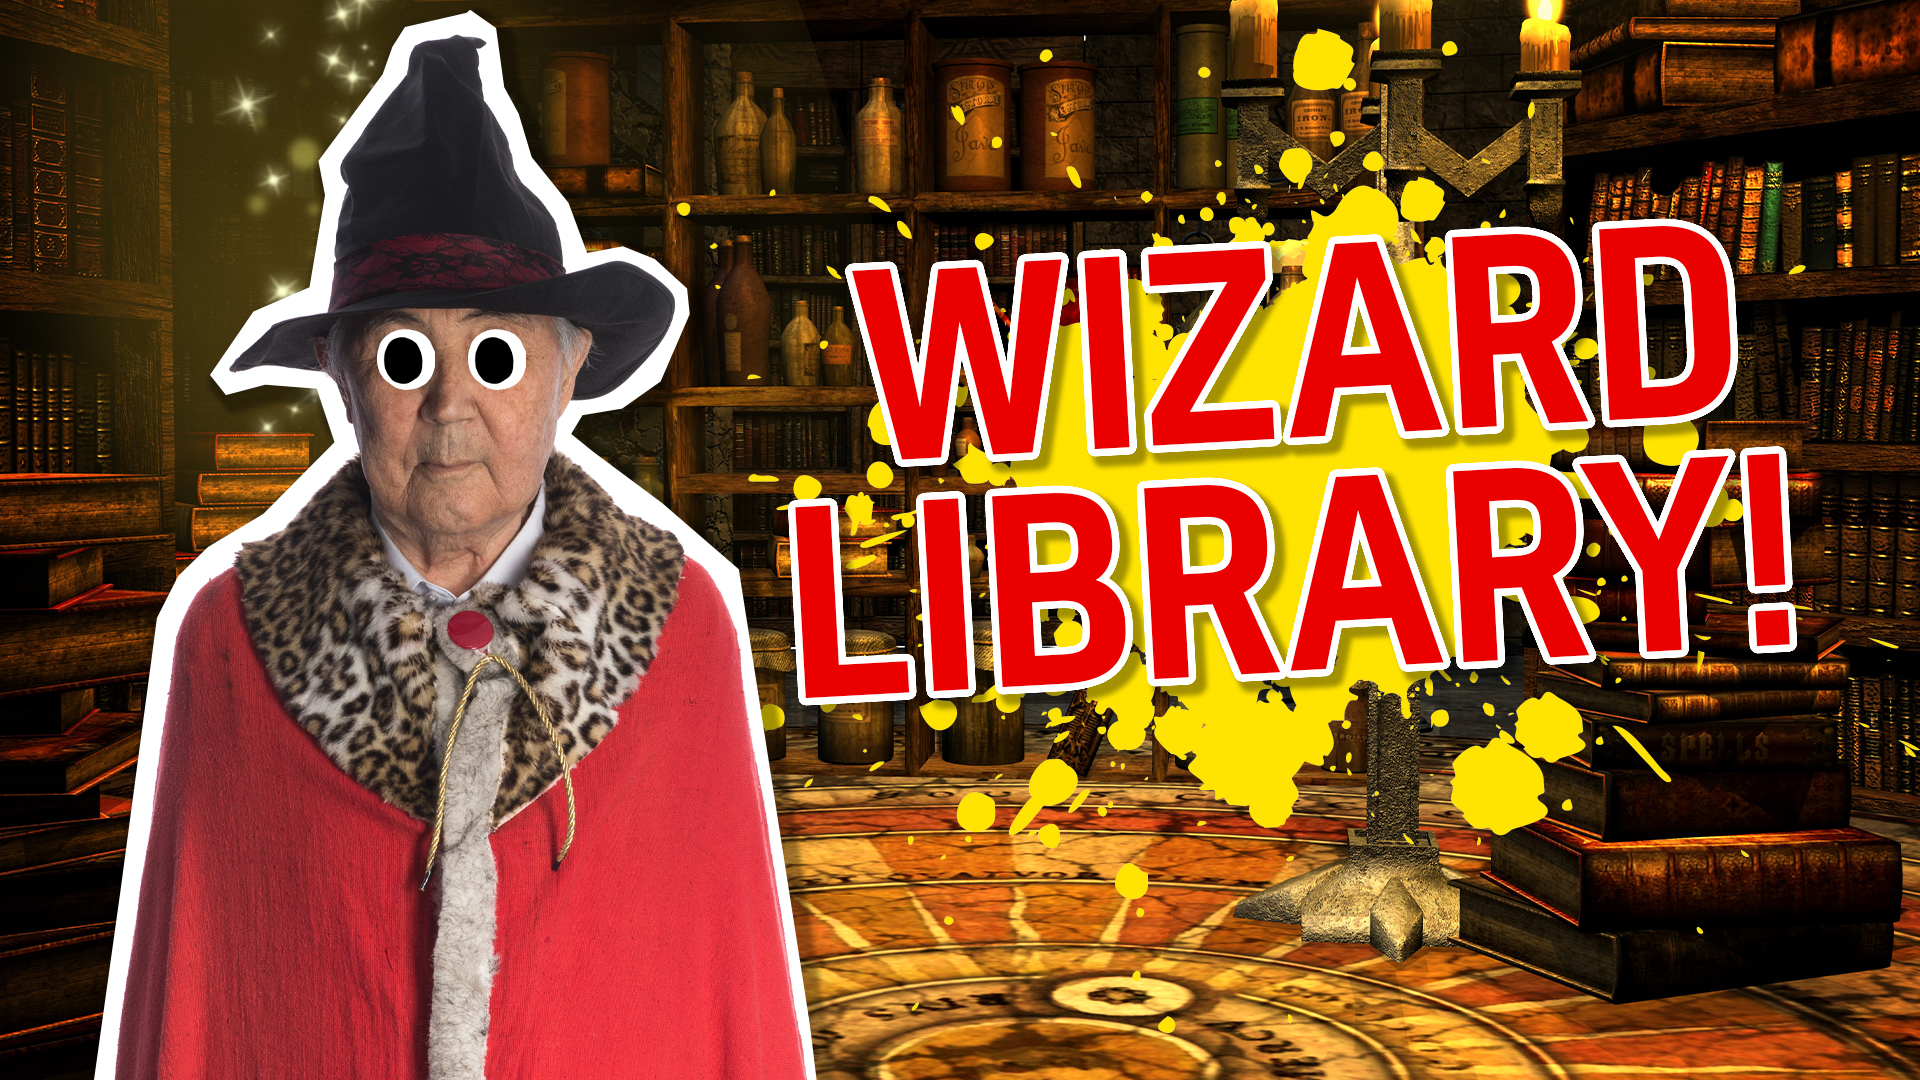 Result: Wizard Library